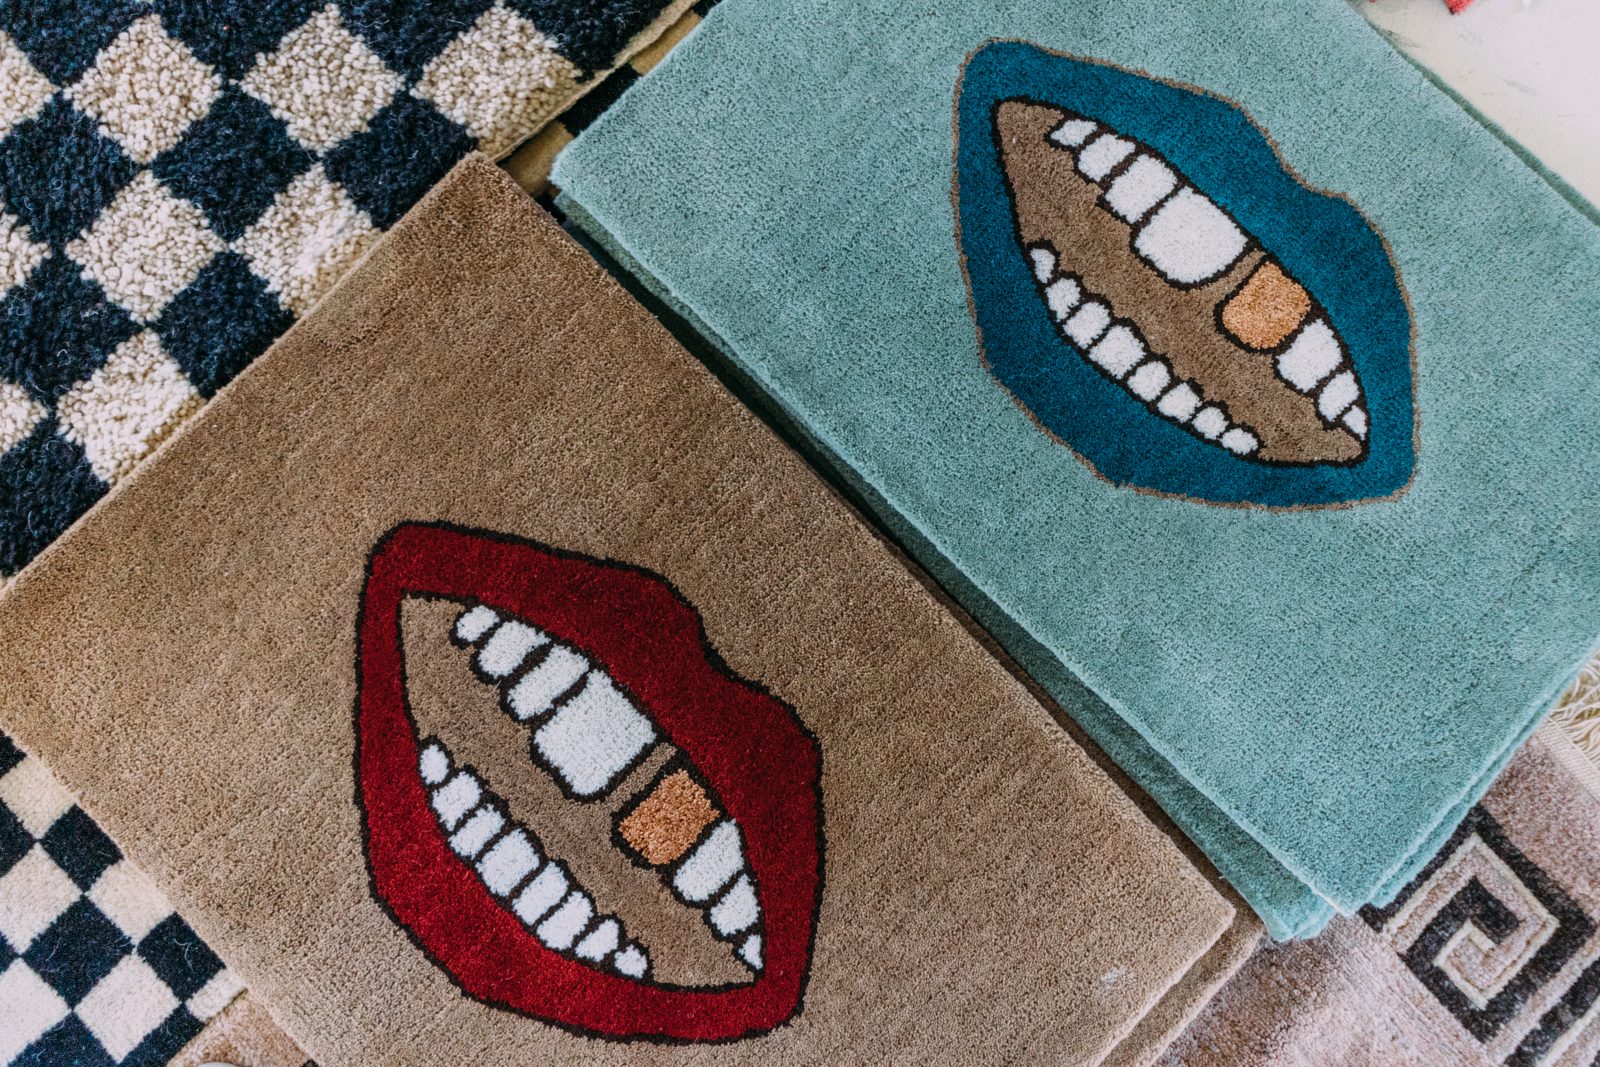 Hand tufted rugs from Relic Home. Gold tooth designs on blue with blue lips, and one with tan background and red lips